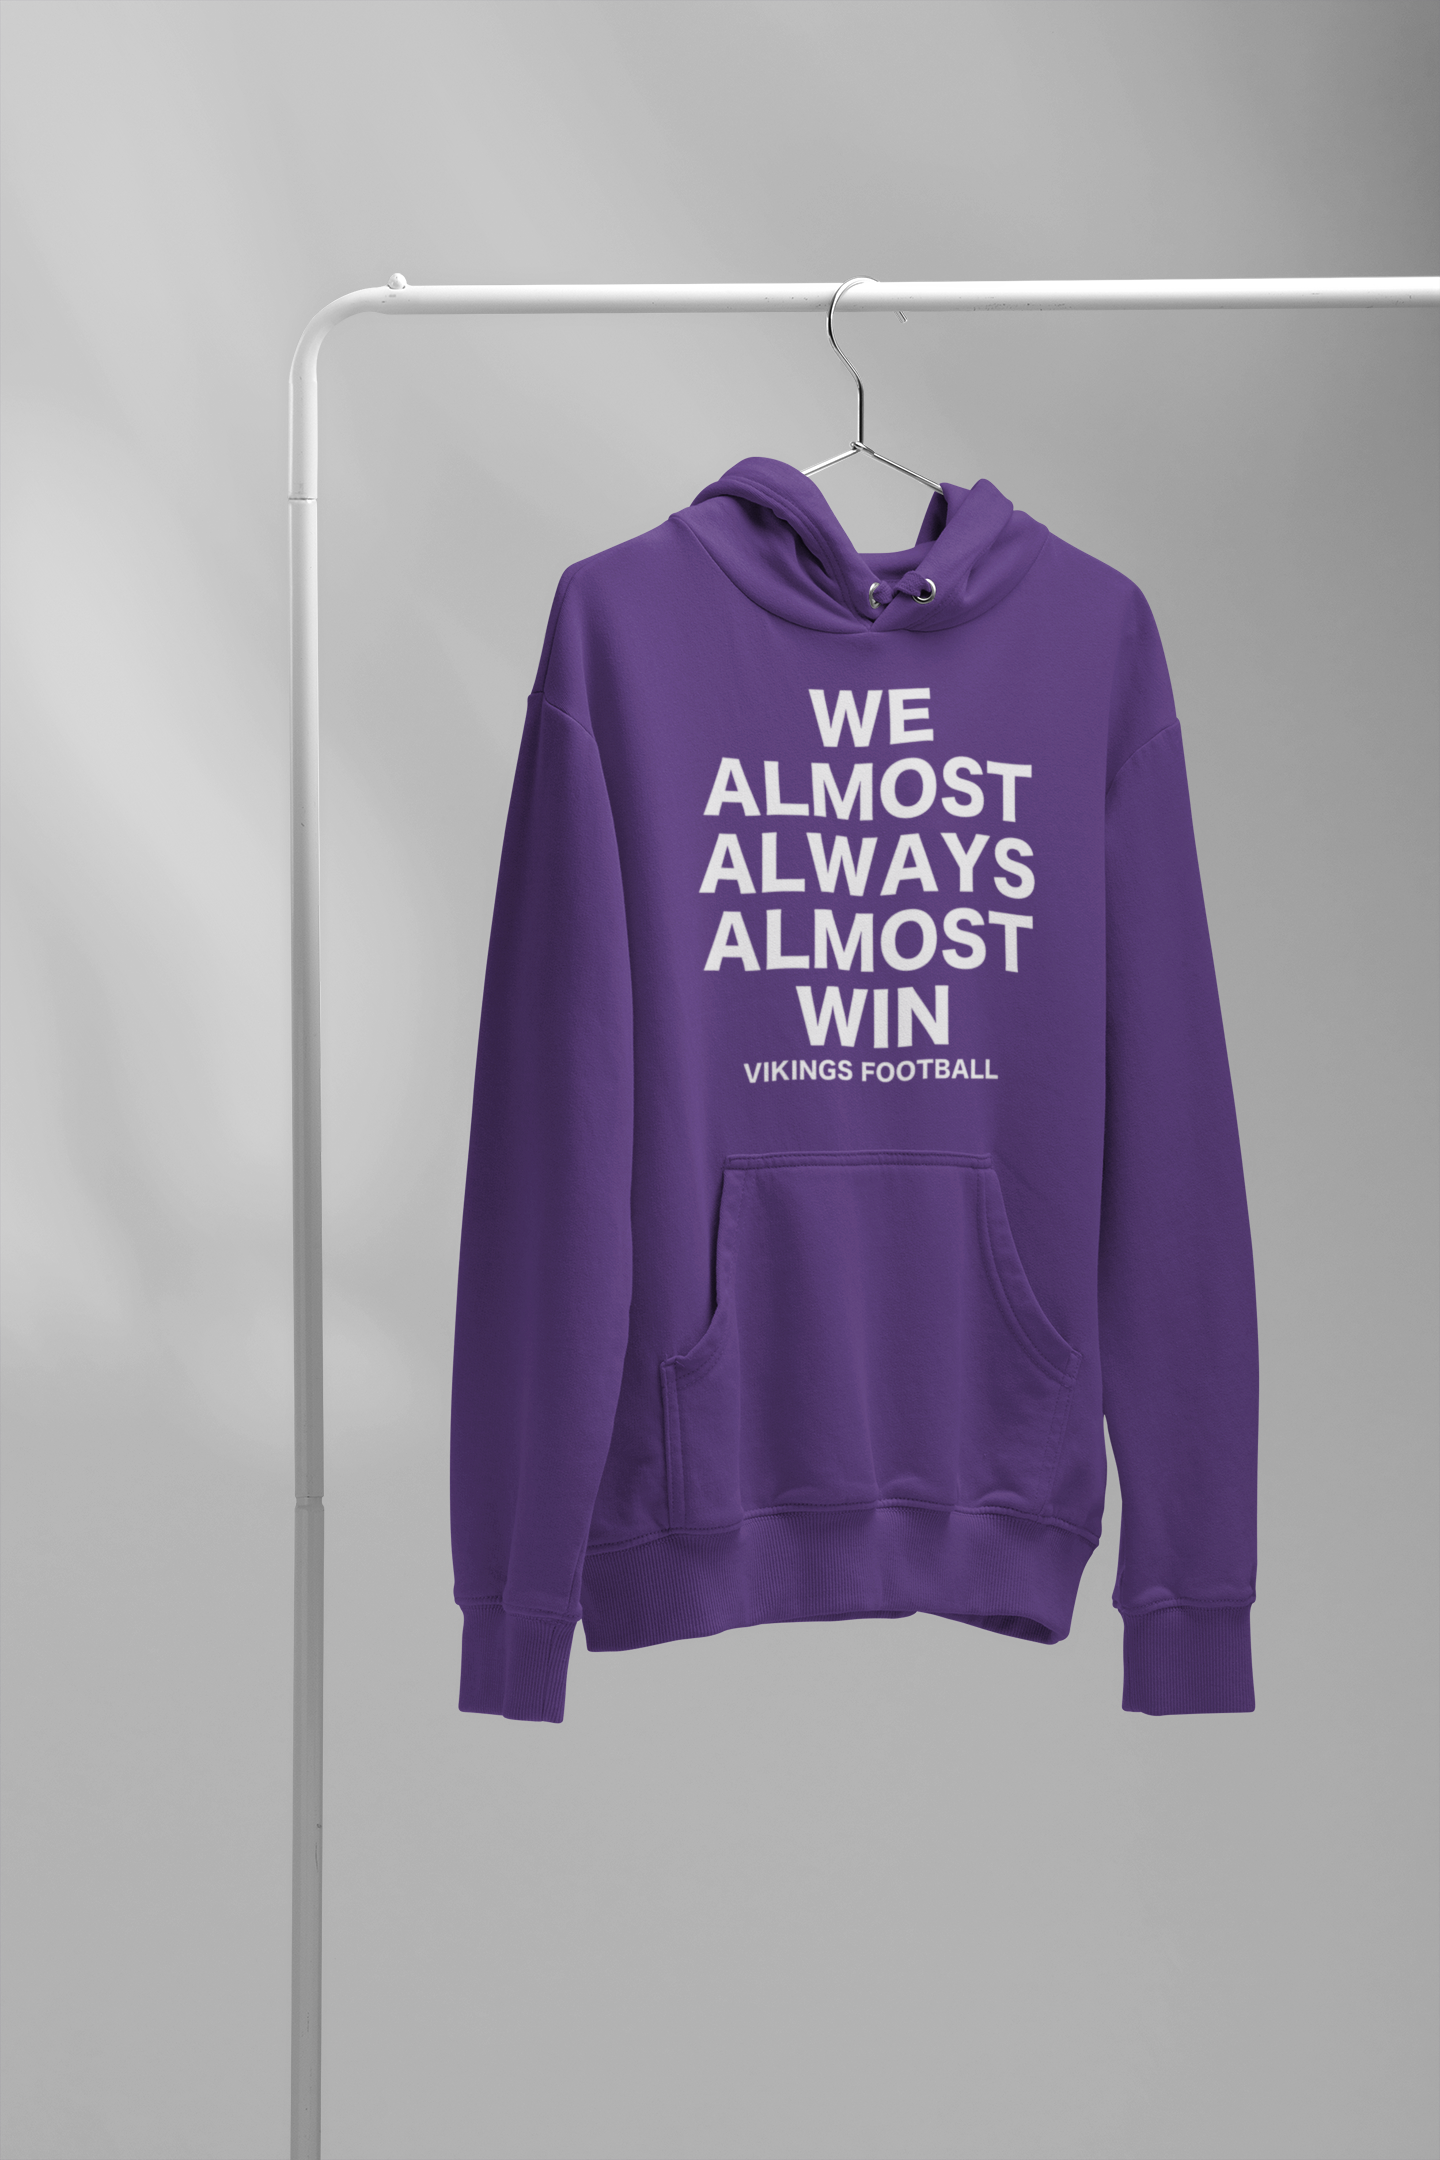 We Almost Always Almost Win Vikings Football Hooded Sweatshirt in purple with white writing. This is the front view of the sweatshirt on a wired hanger hanging on a clothing rack.